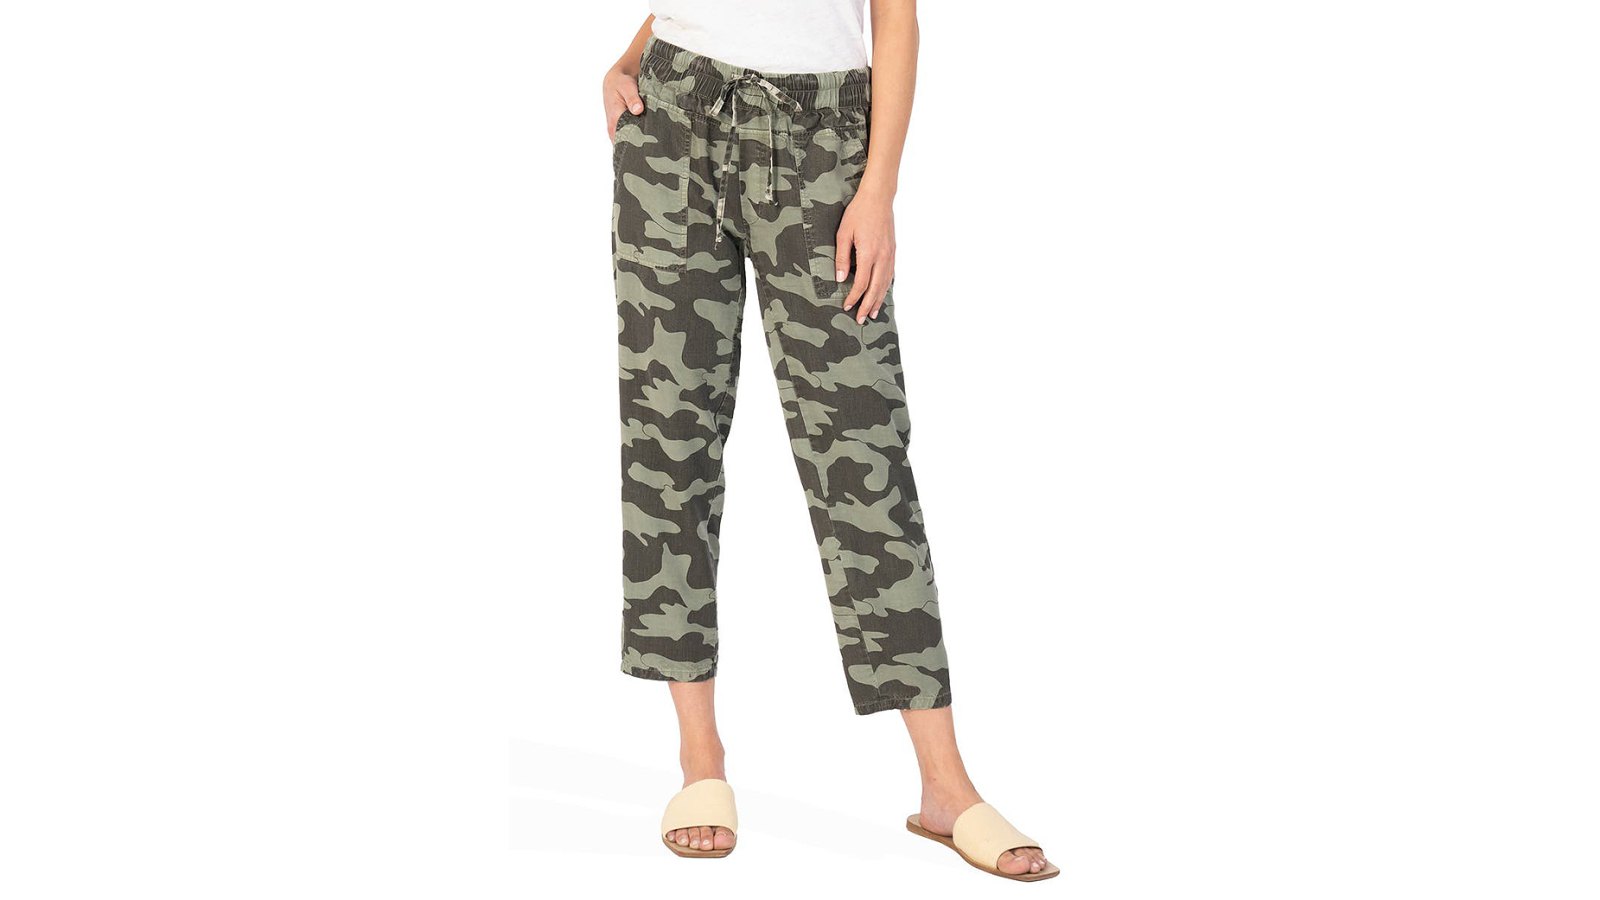 nordstrom-kut-from-the-kloth-camo-pants